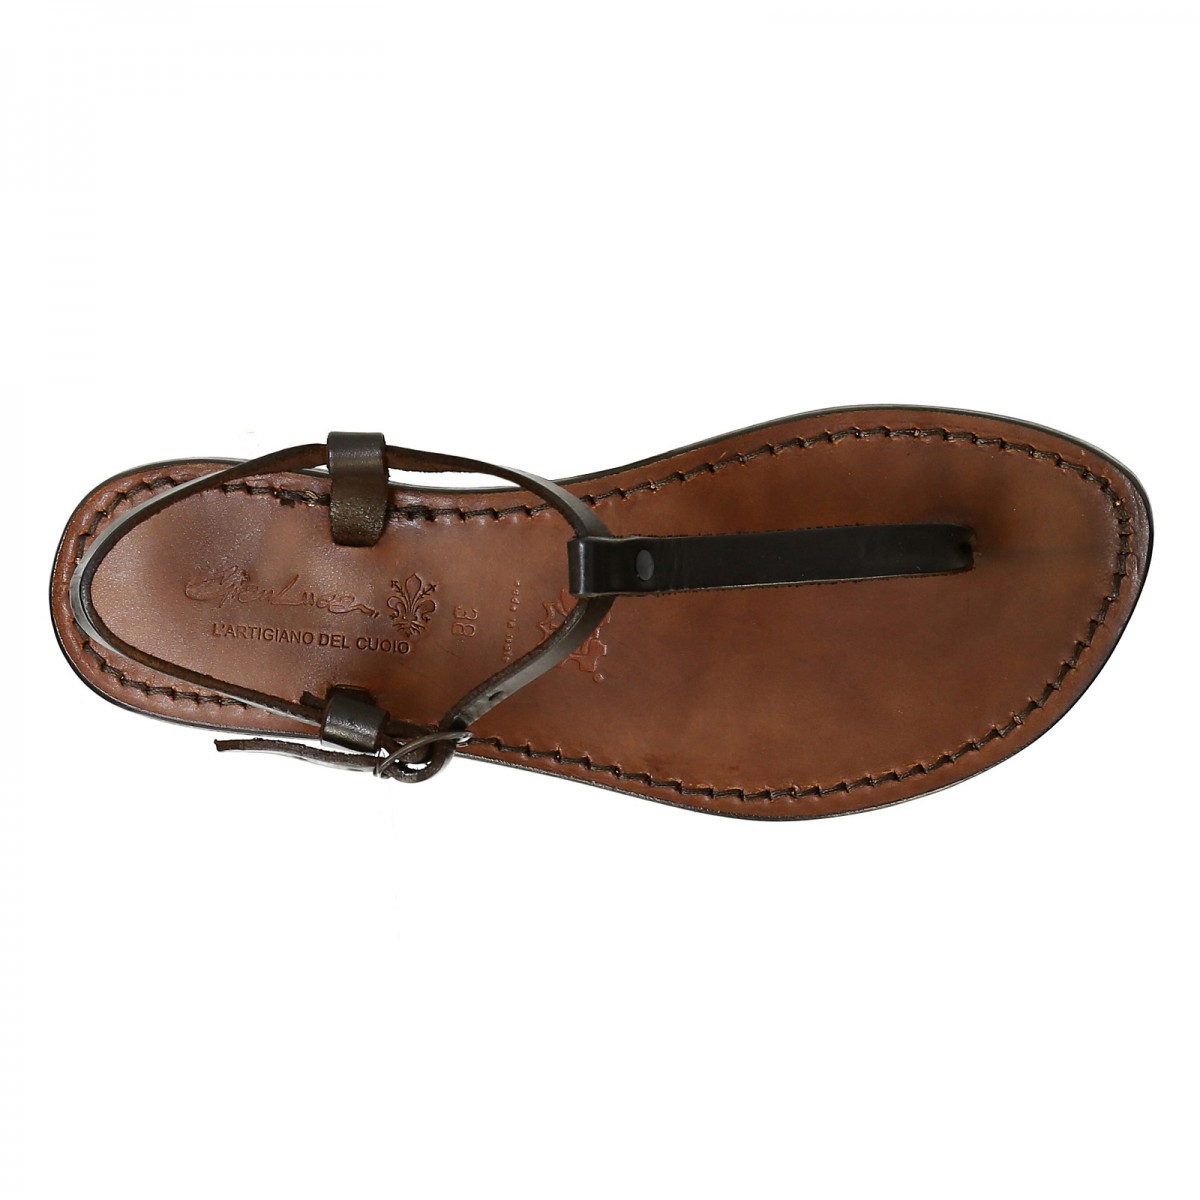 Thong sandals in Dark Brown Leather handmade in Italy | The leather ...